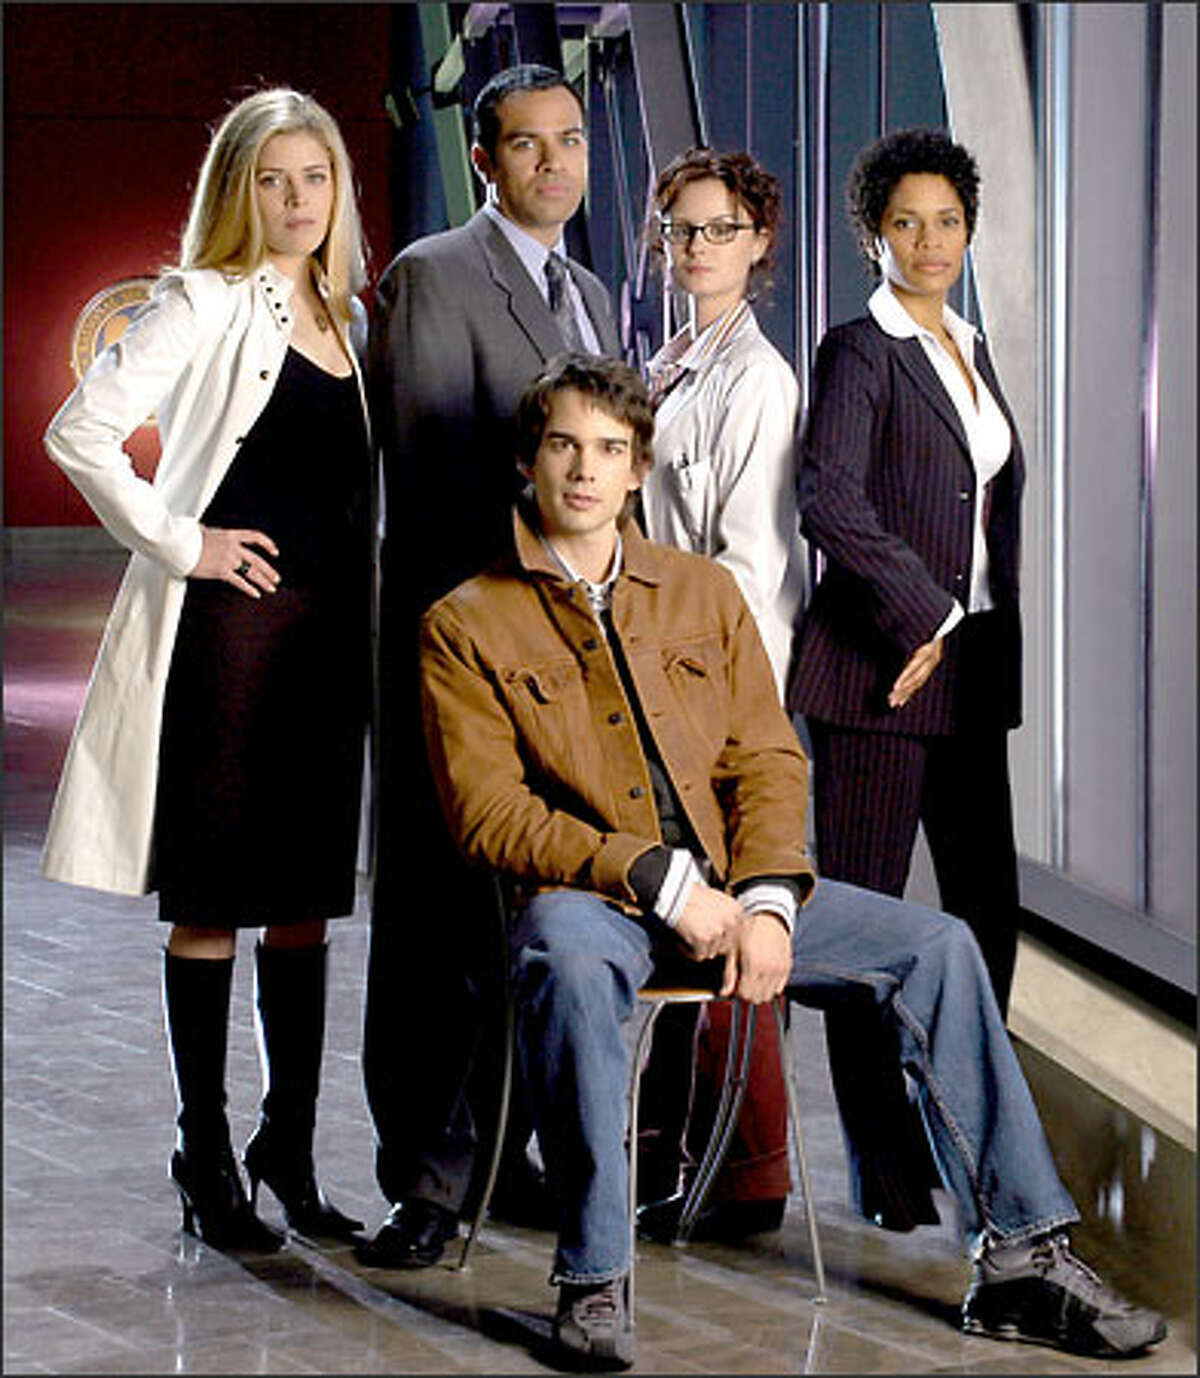 From left, standing, Marina Black, Phillip Anthony-Rodriguez, Keegan Connor Tracy and Judith Scott, and seated, Christopher Gorham comprise the primary cast of "Jake 2.0" on UPN.